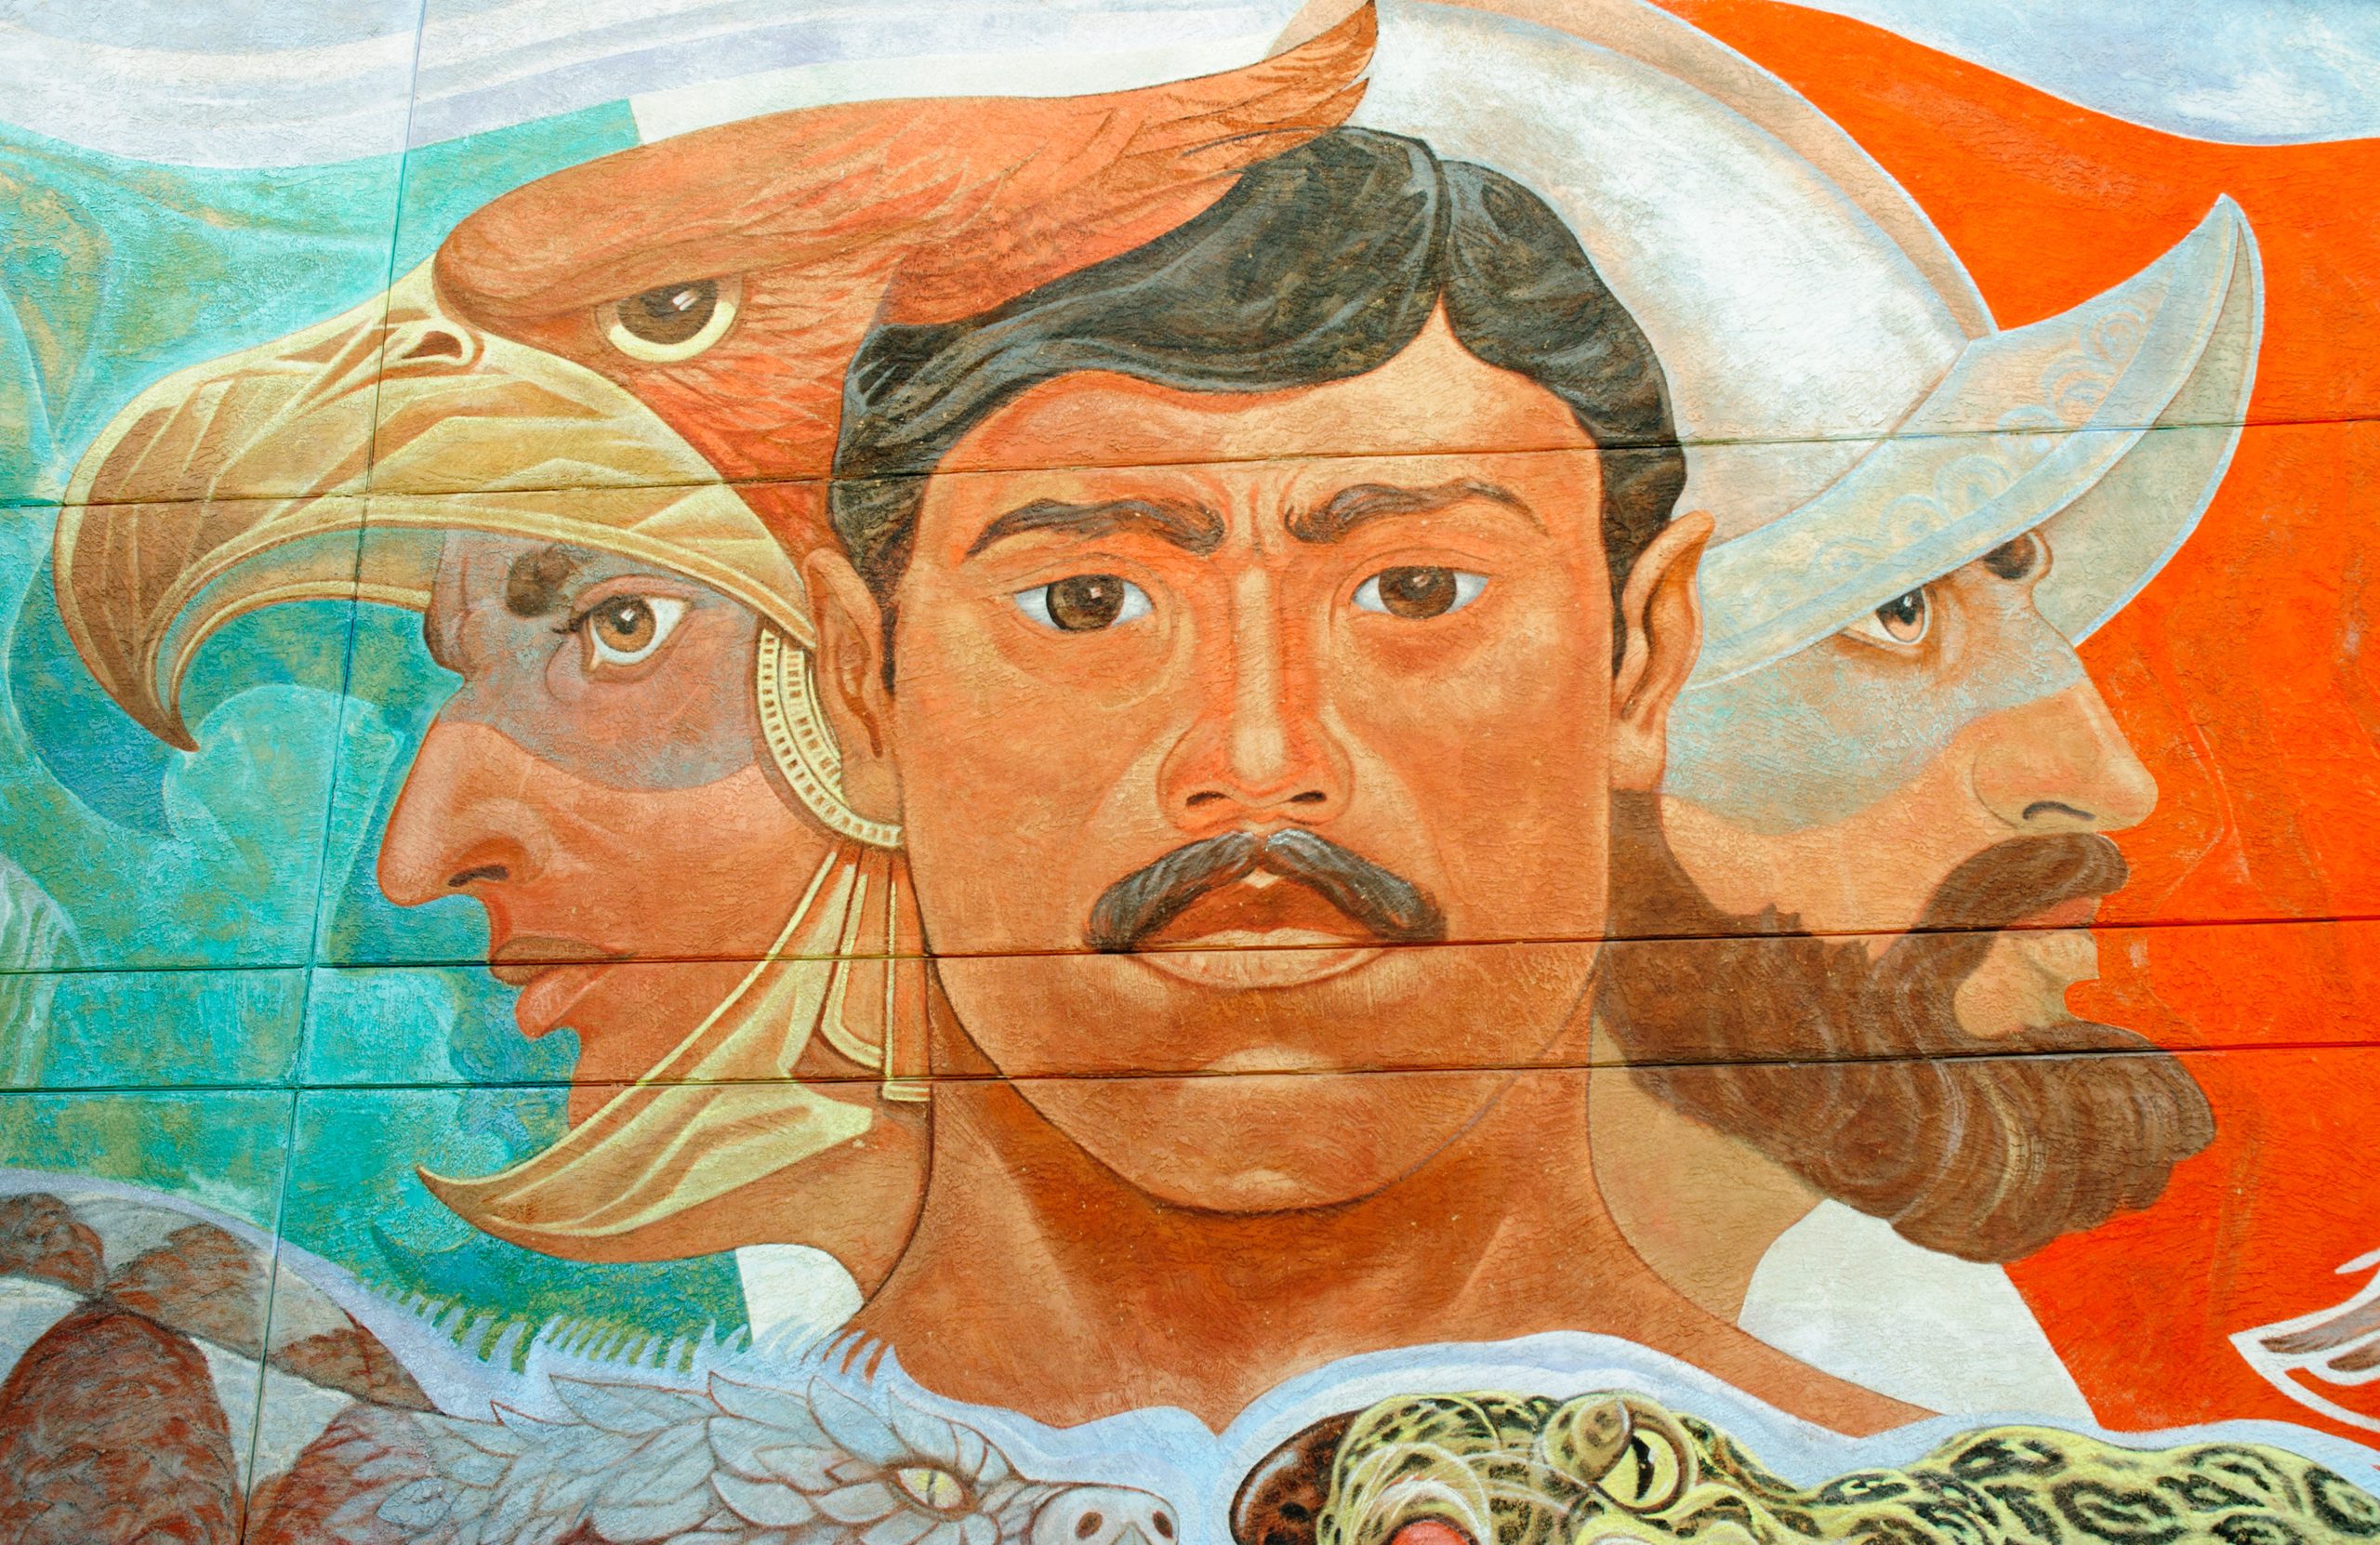 A colorful mural depicting some of the diverse people, history, and heritage of the United States and Mexico.